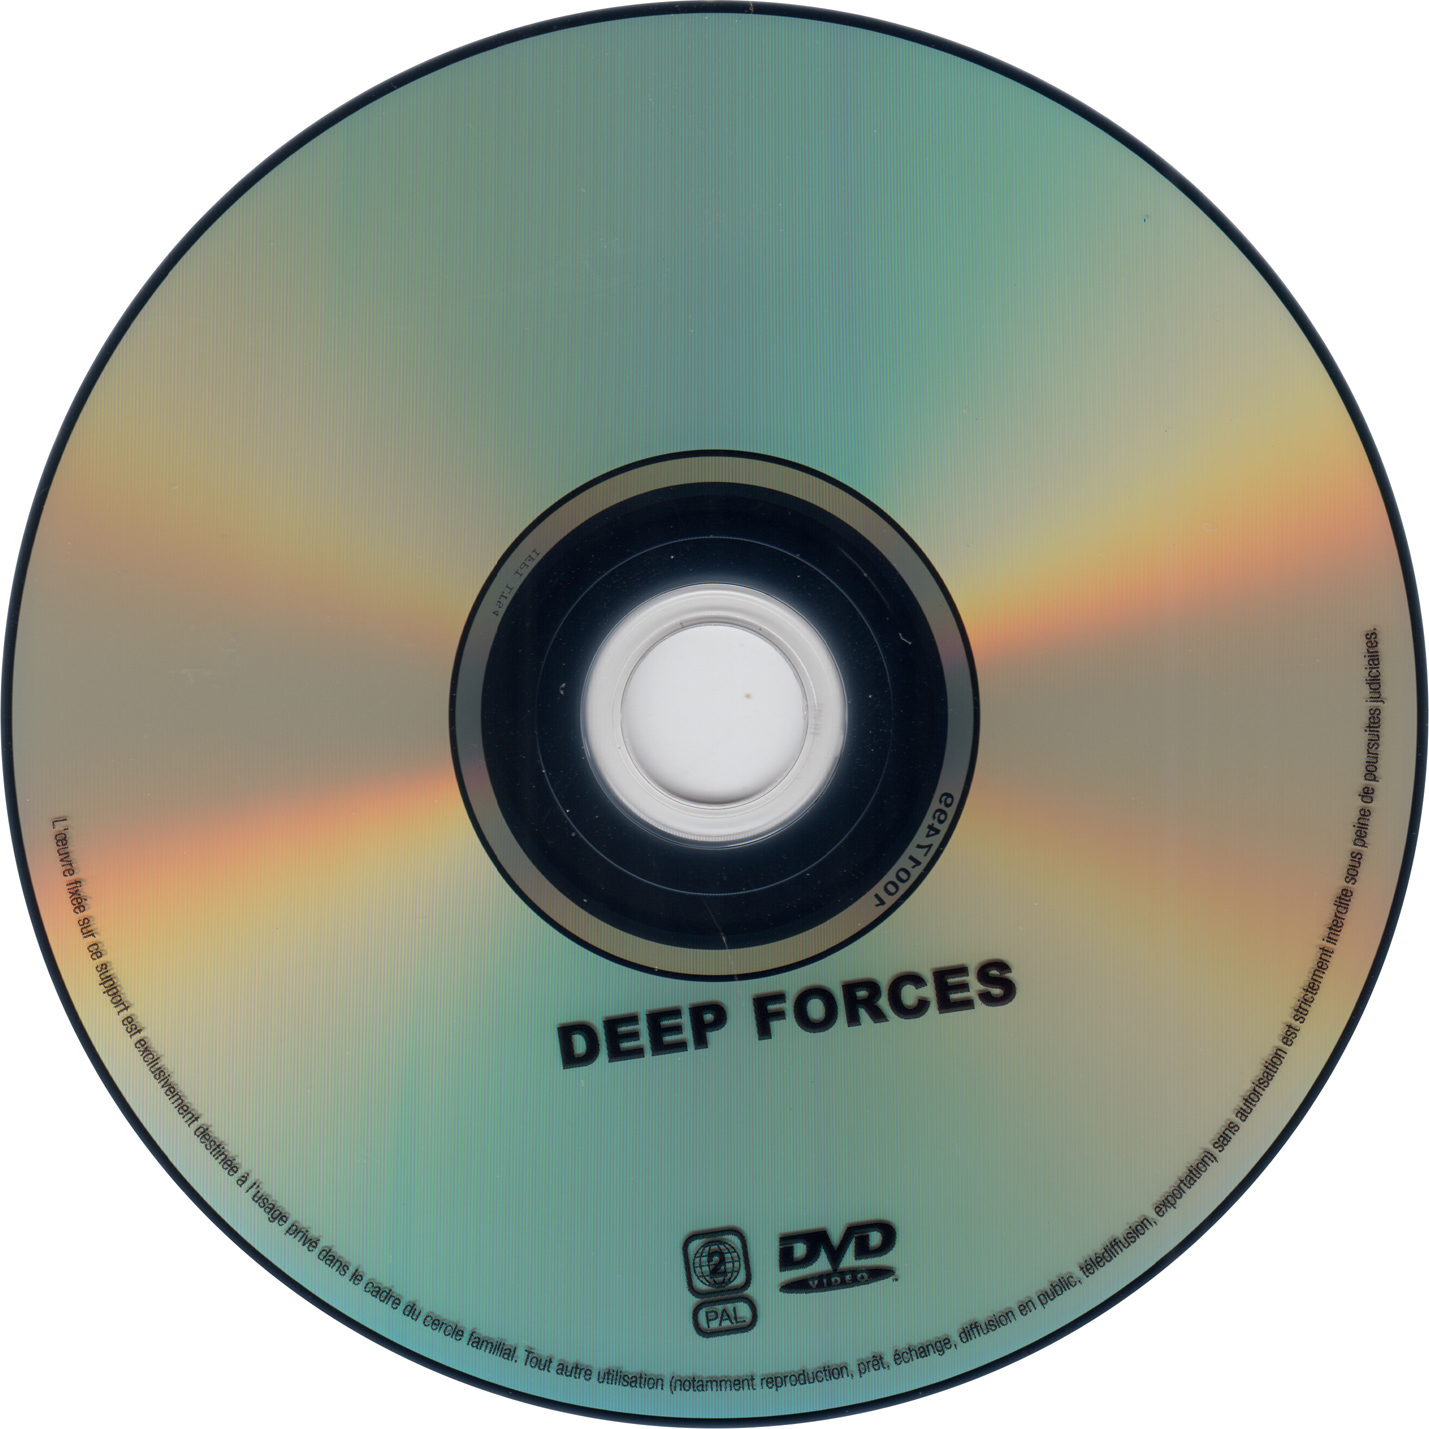 Deep force special force USA